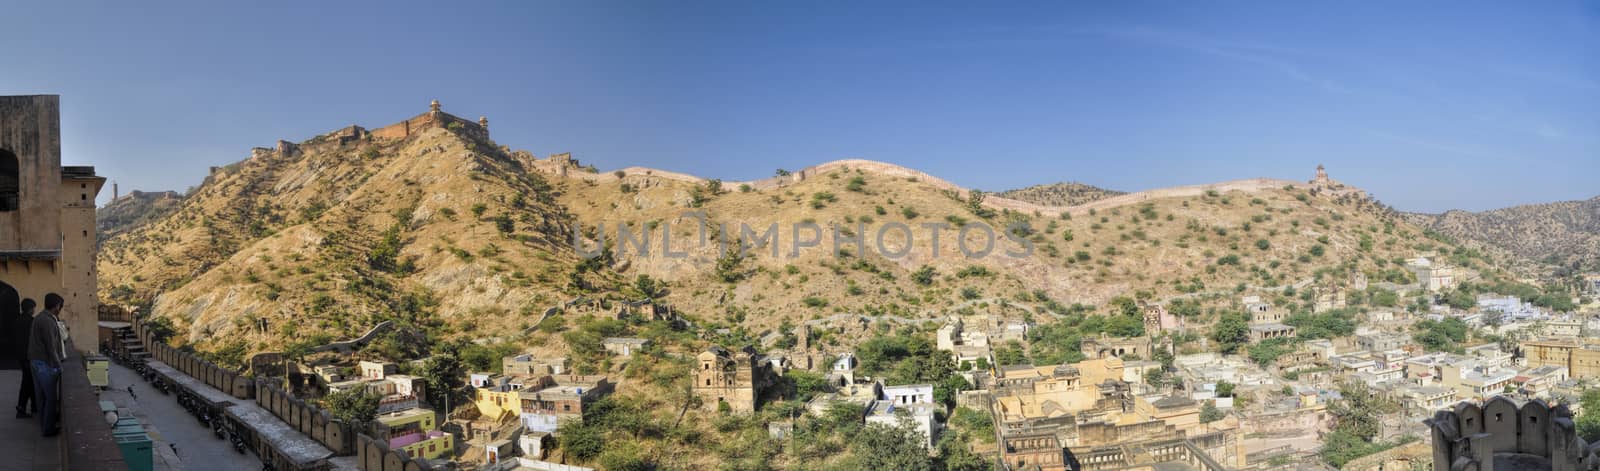 Panoramic view of Amer Palace standing on a hilltop in Rajasthan, India